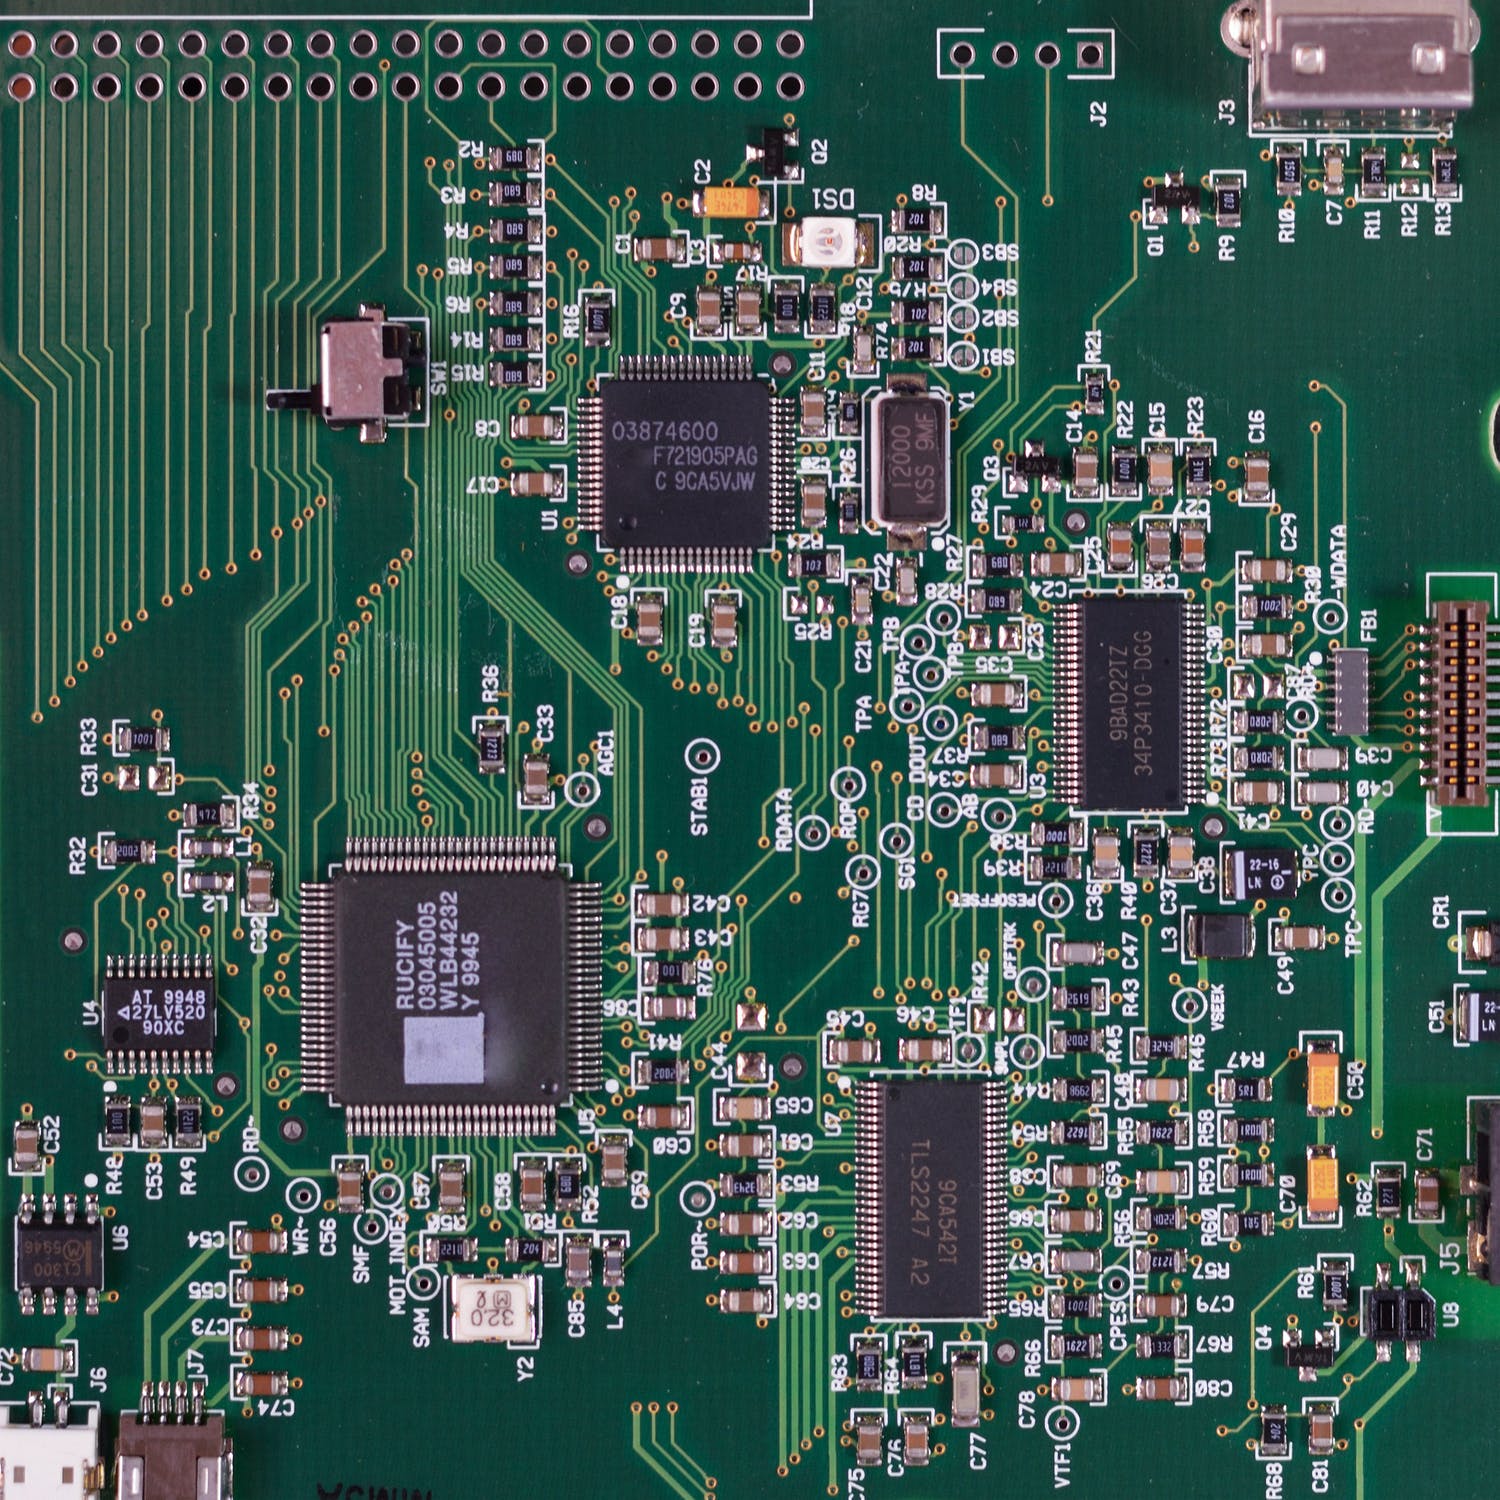 The Benefits of Using the Printed Circuit Boards